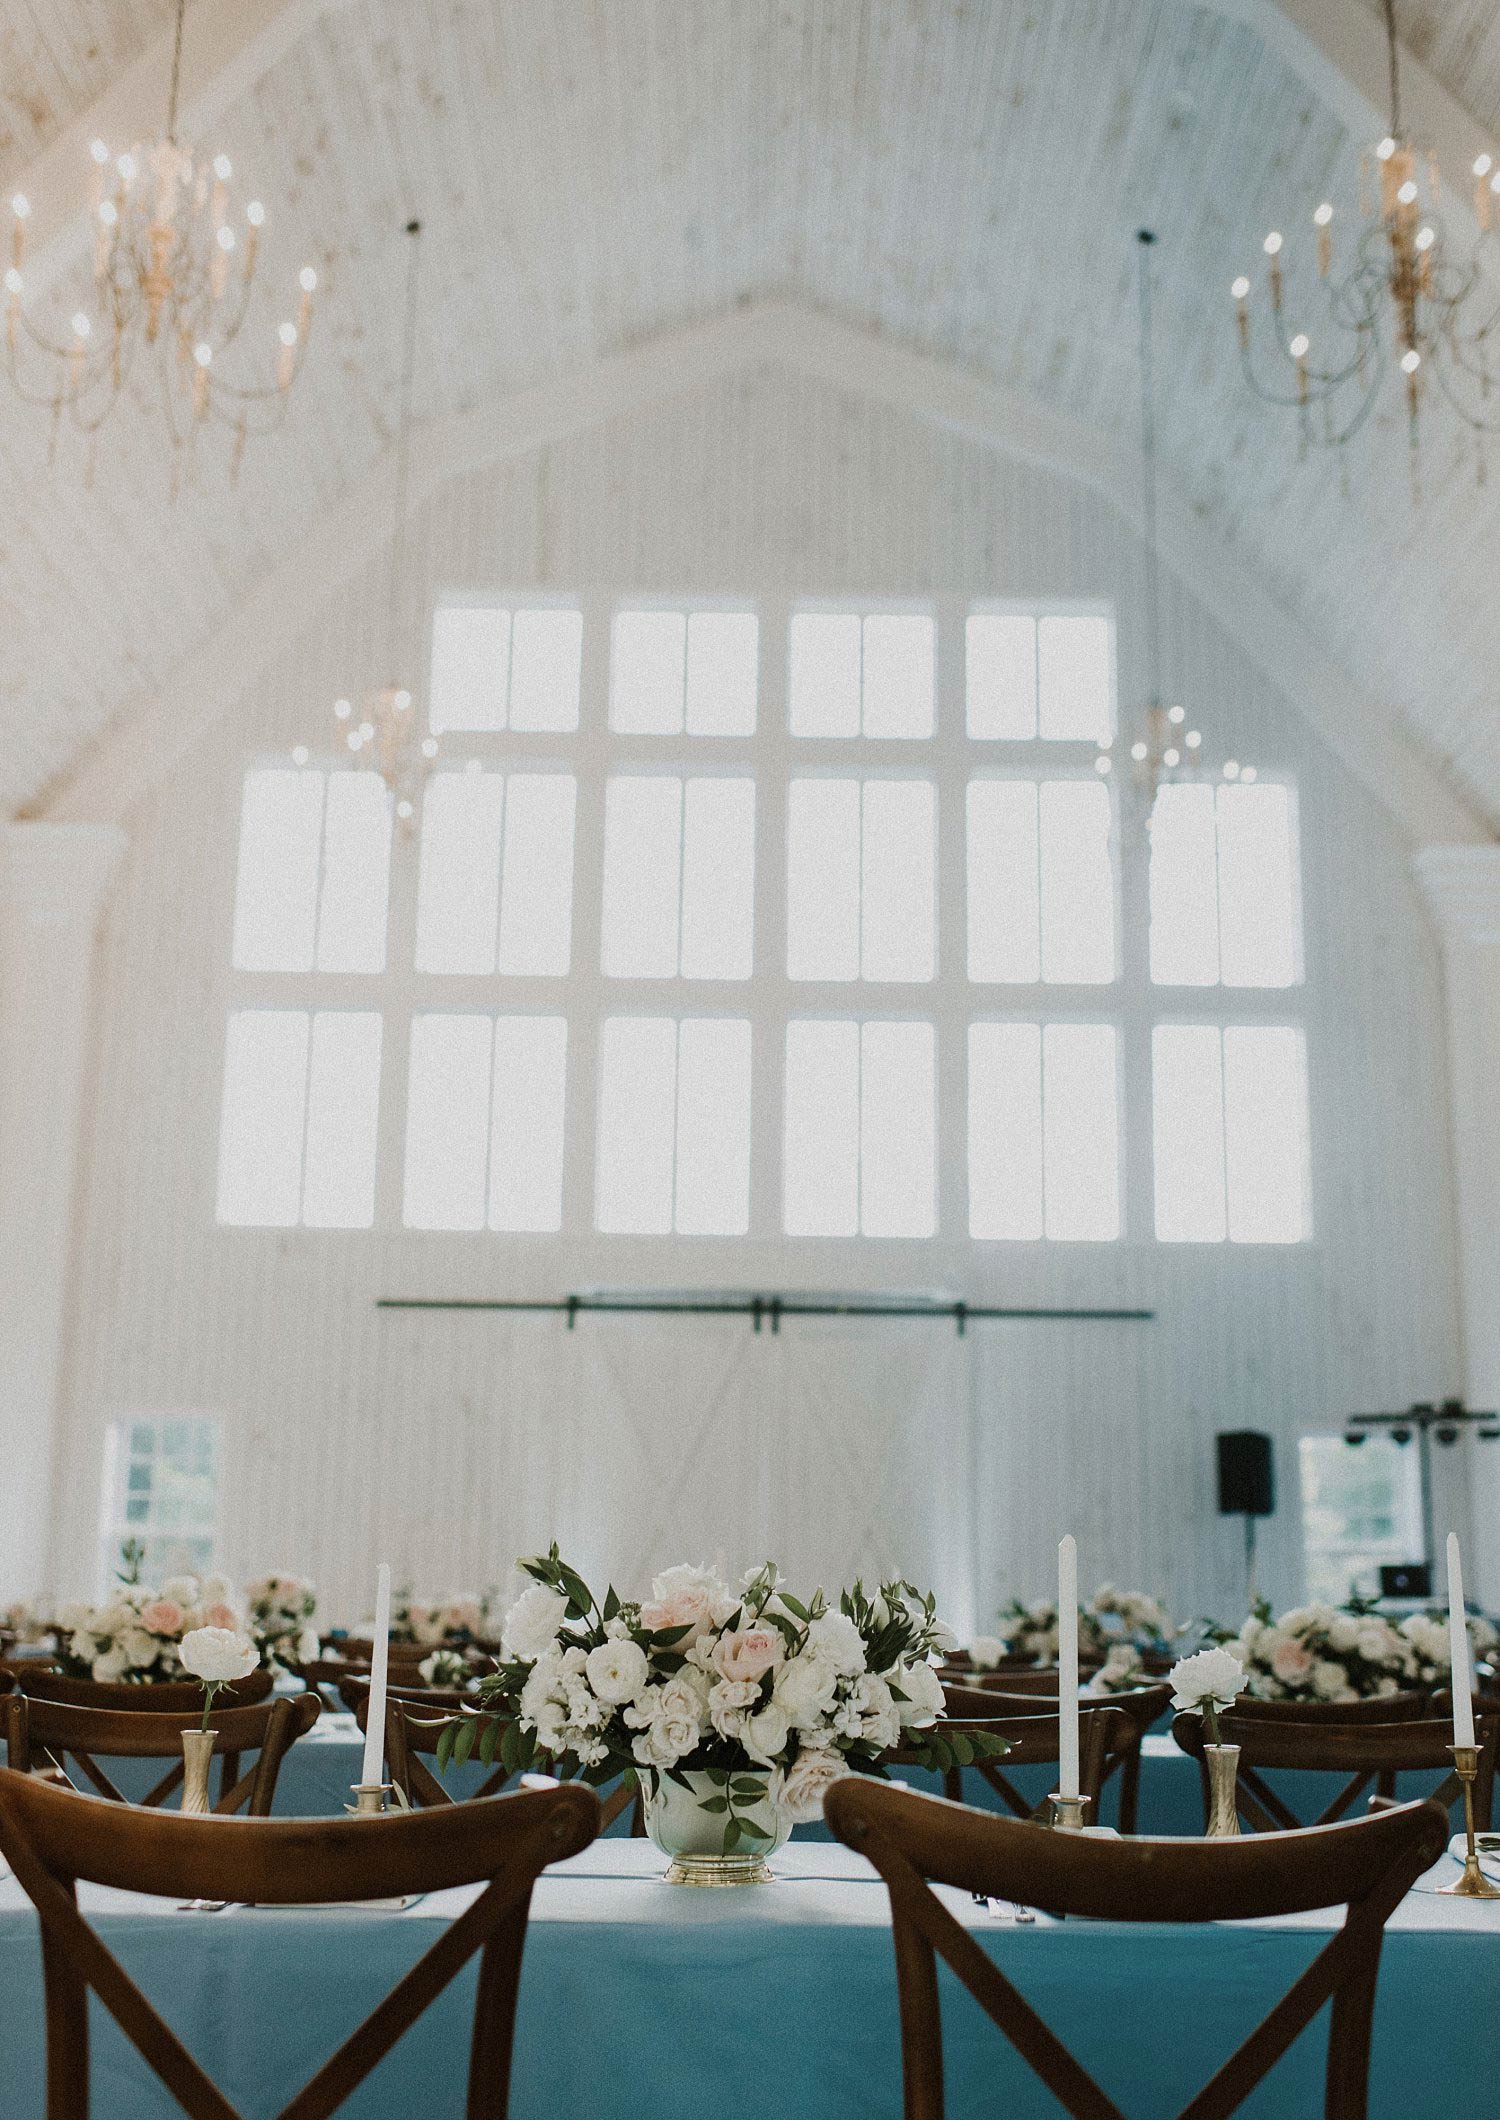 White Sparrow Barn wedding reception dusty blue linens and white and blush flowers in gold vase